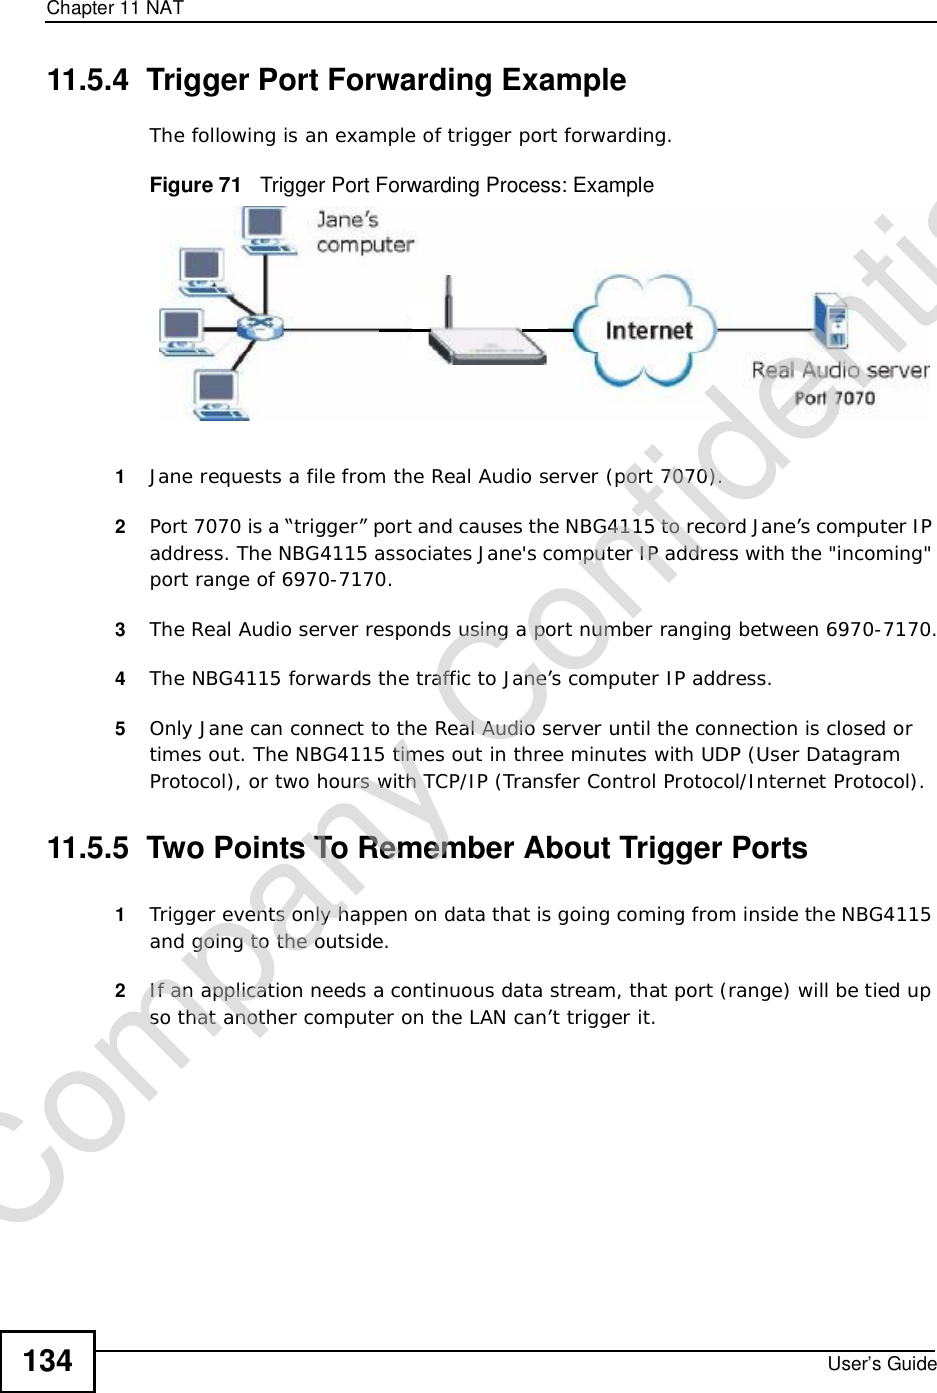 Chapter 11NATUser’s Guide13411.5.4  Trigger Port Forwarding Example The following is an example of trigger port forwarding.Figure 71   Trigger Port Forwarding Process: Example1Jane requests a file from the Real Audio server (port 7070).2Port 7070 is a “trigger” port and causes the NBG4115 to record Jane’s computer IP address. The NBG4115 associates Jane&apos;s computer IP address with the &quot;incoming&quot; port range of 6970-7170.3The Real Audio server responds using a port number ranging between 6970-7170.4The NBG4115 forwards the traffic to Jane’s computer IP address. 5Only Jane can connect to the Real Audio server until the connection is closed or times out. The NBG4115 times out in three minutes with UDP (User Datagram Protocol), or two hours with TCP/IP (Transfer Control Protocol/Internet Protocol). 11.5.5  Two Points To Remember About Trigger Ports1Trigger events only happen on data that is going coming from inside the NBG4115 and going to the outside.2If an application needs a continuous data stream, that port (range) will be tied up so that another computer on the LAN can’t trigger it.Company Confidential